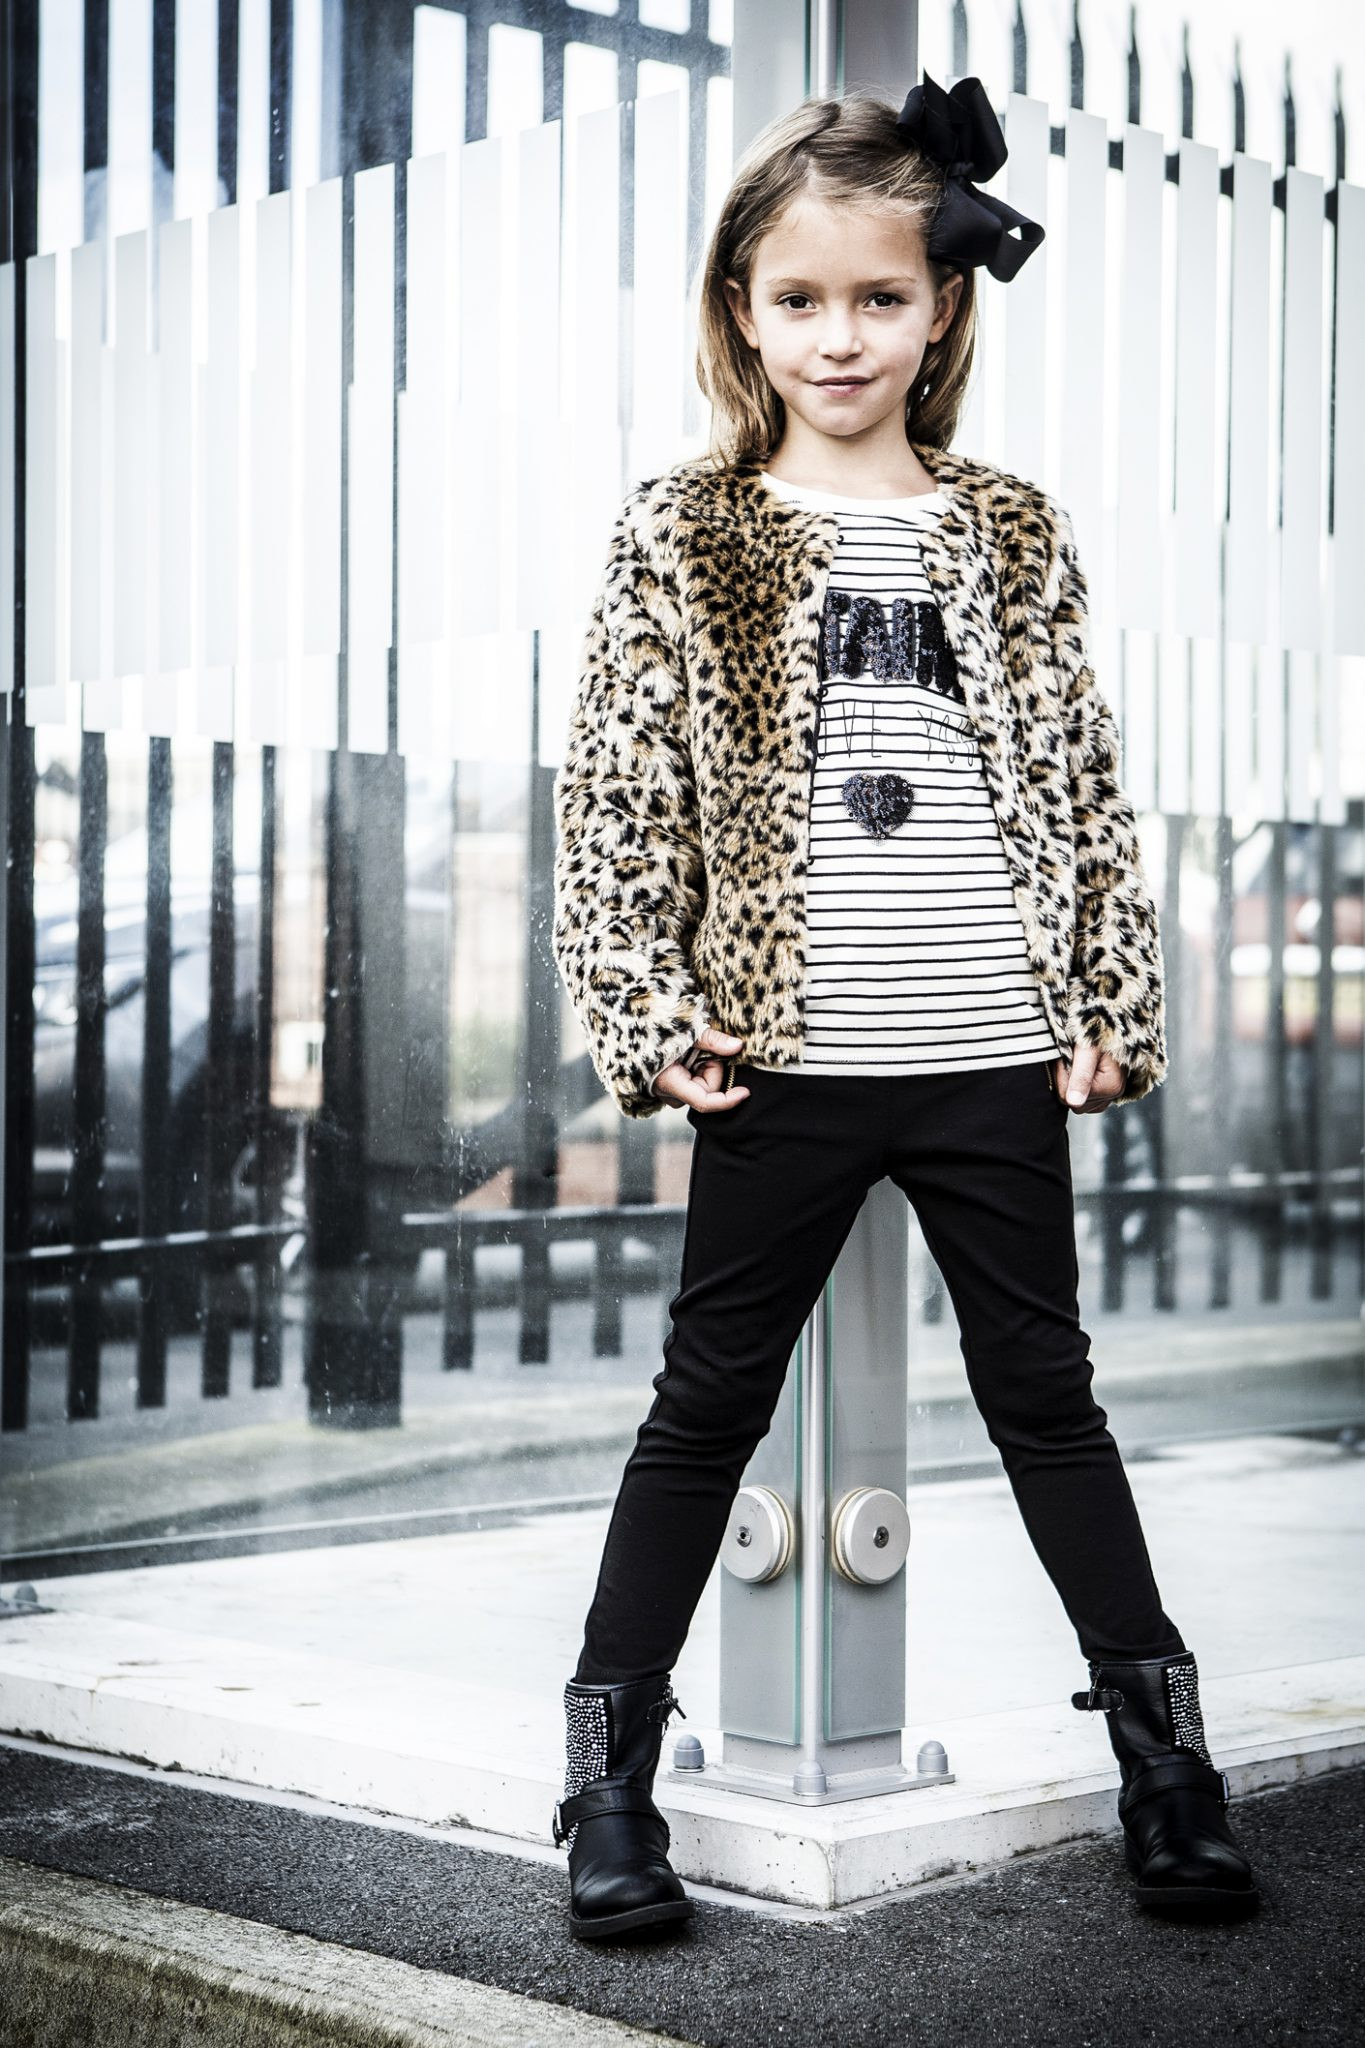 Child Fashion Photography
 kids fashion photography shot on location in Manchester